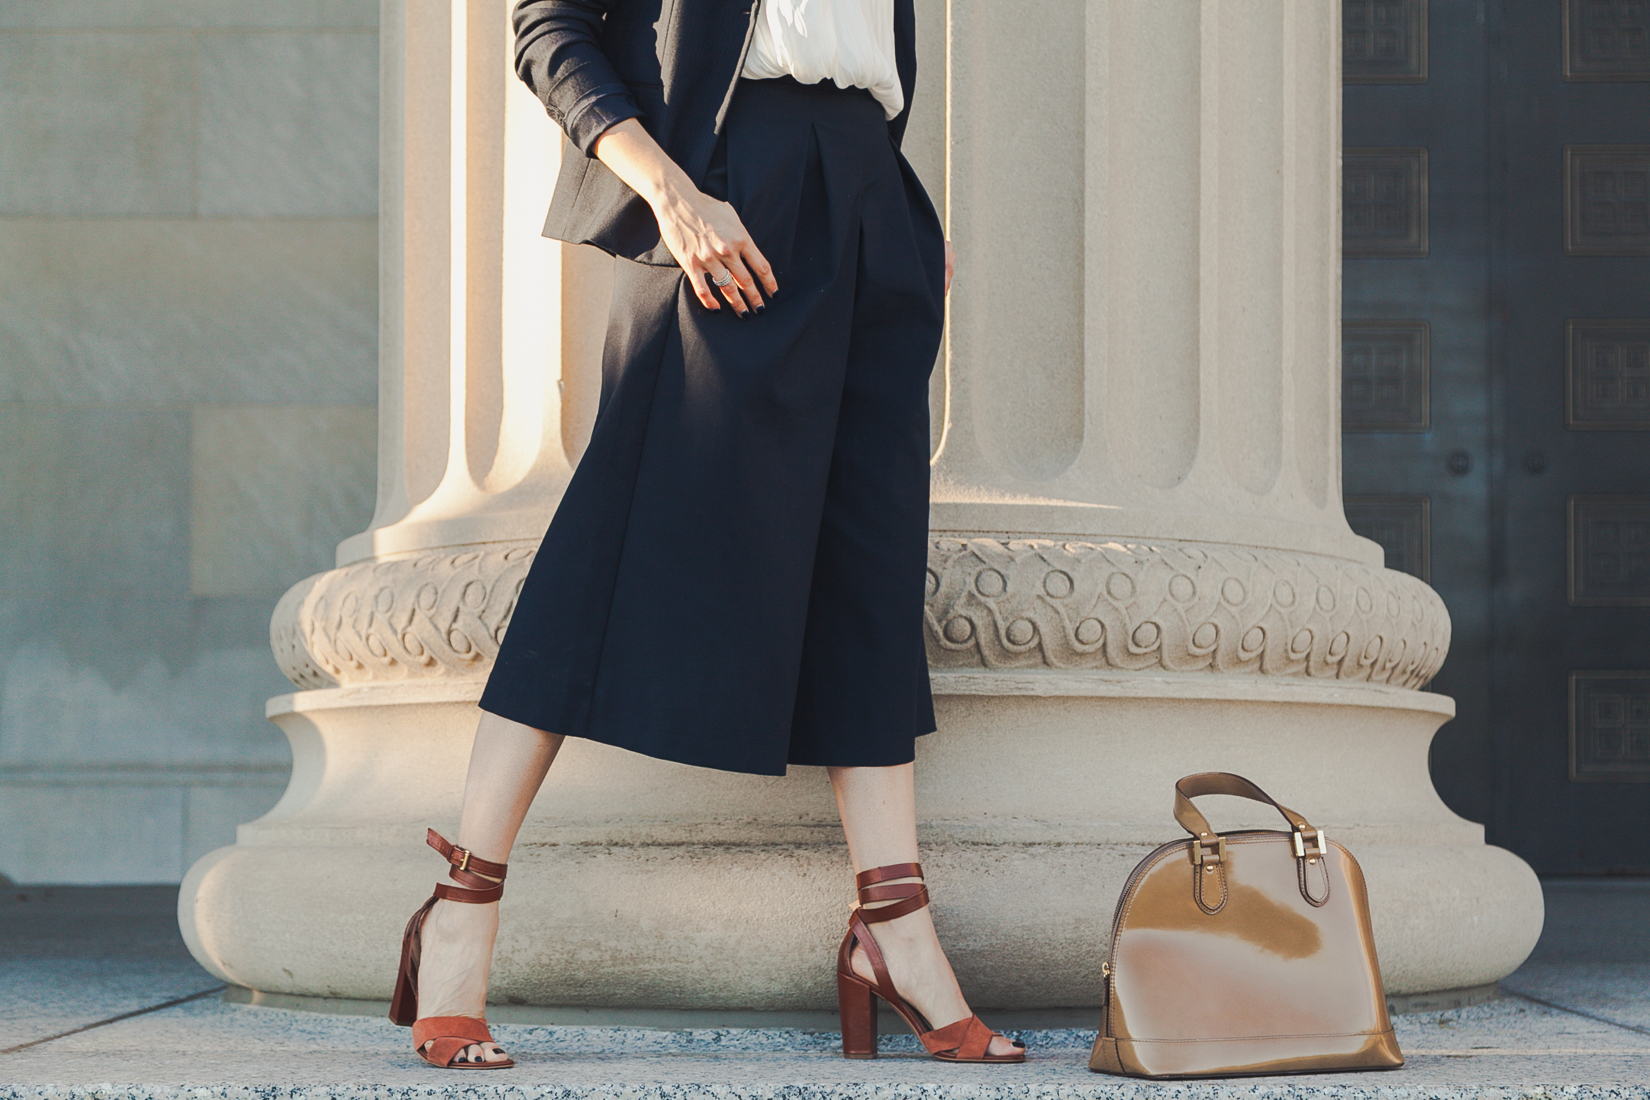 Yana Puaca of NoMad Luxuries wearing a navy suit from zara, theory and banana republic and a tjmaxx purse in Chicago for the Fall